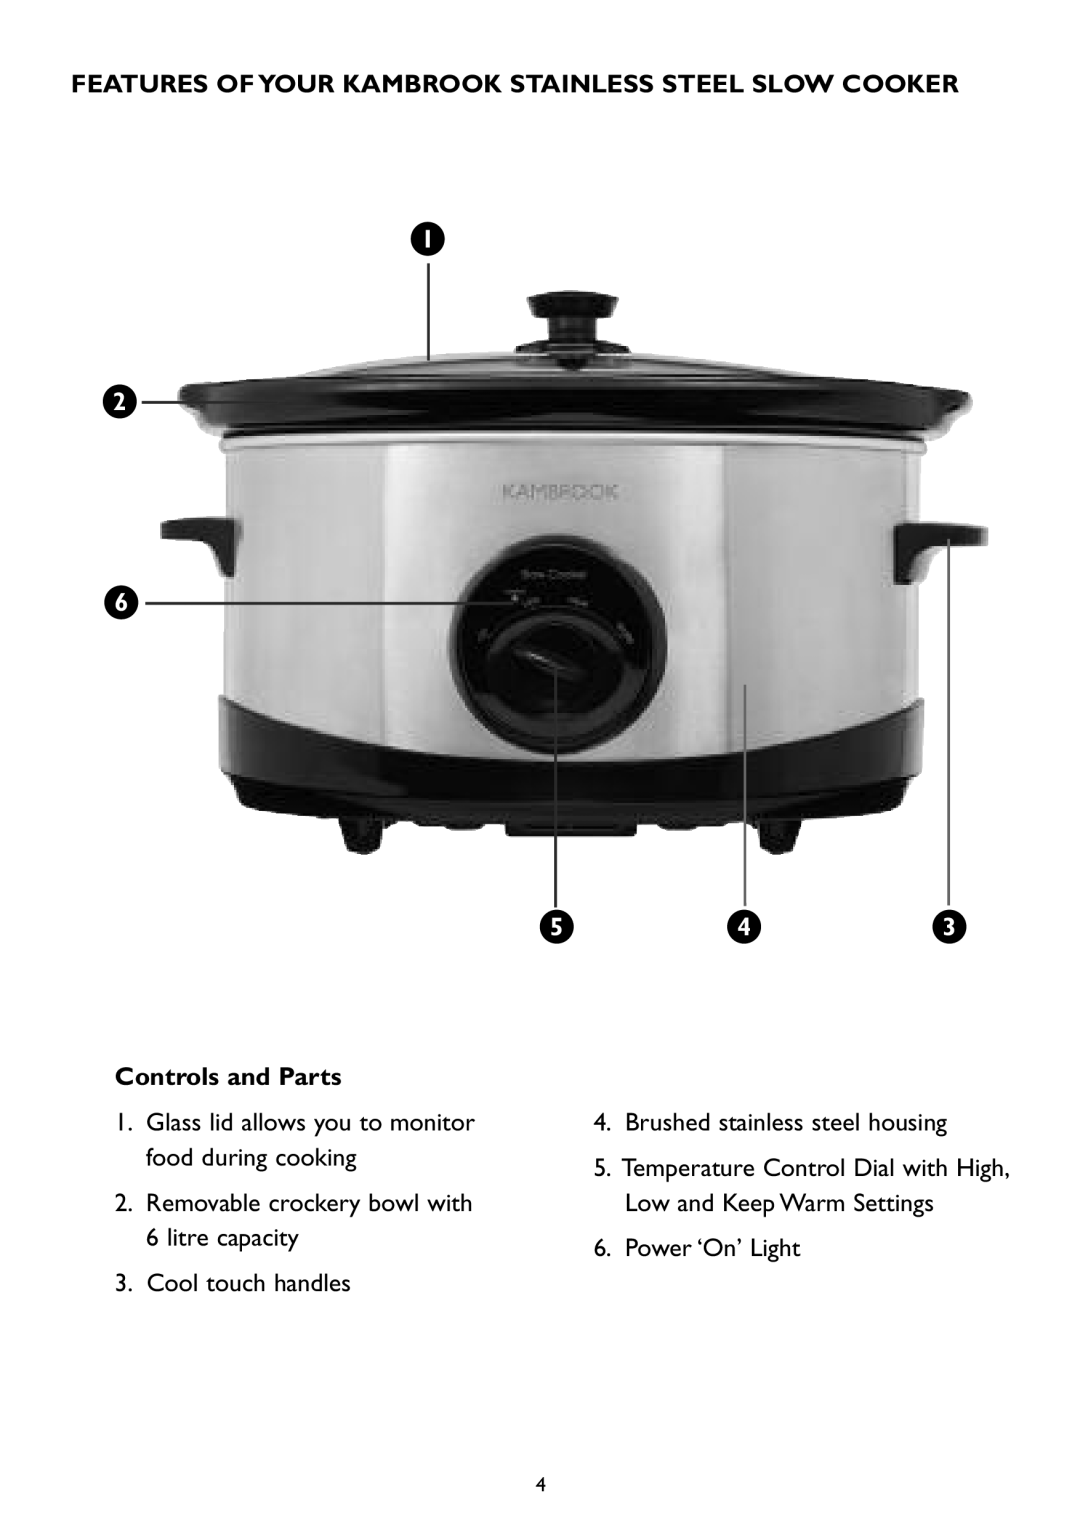 Kambrook KSC 100 manual Features Of Your Kambrook Stainless Steel Slow Cooker, Controls and Parts, Cool touch handles 